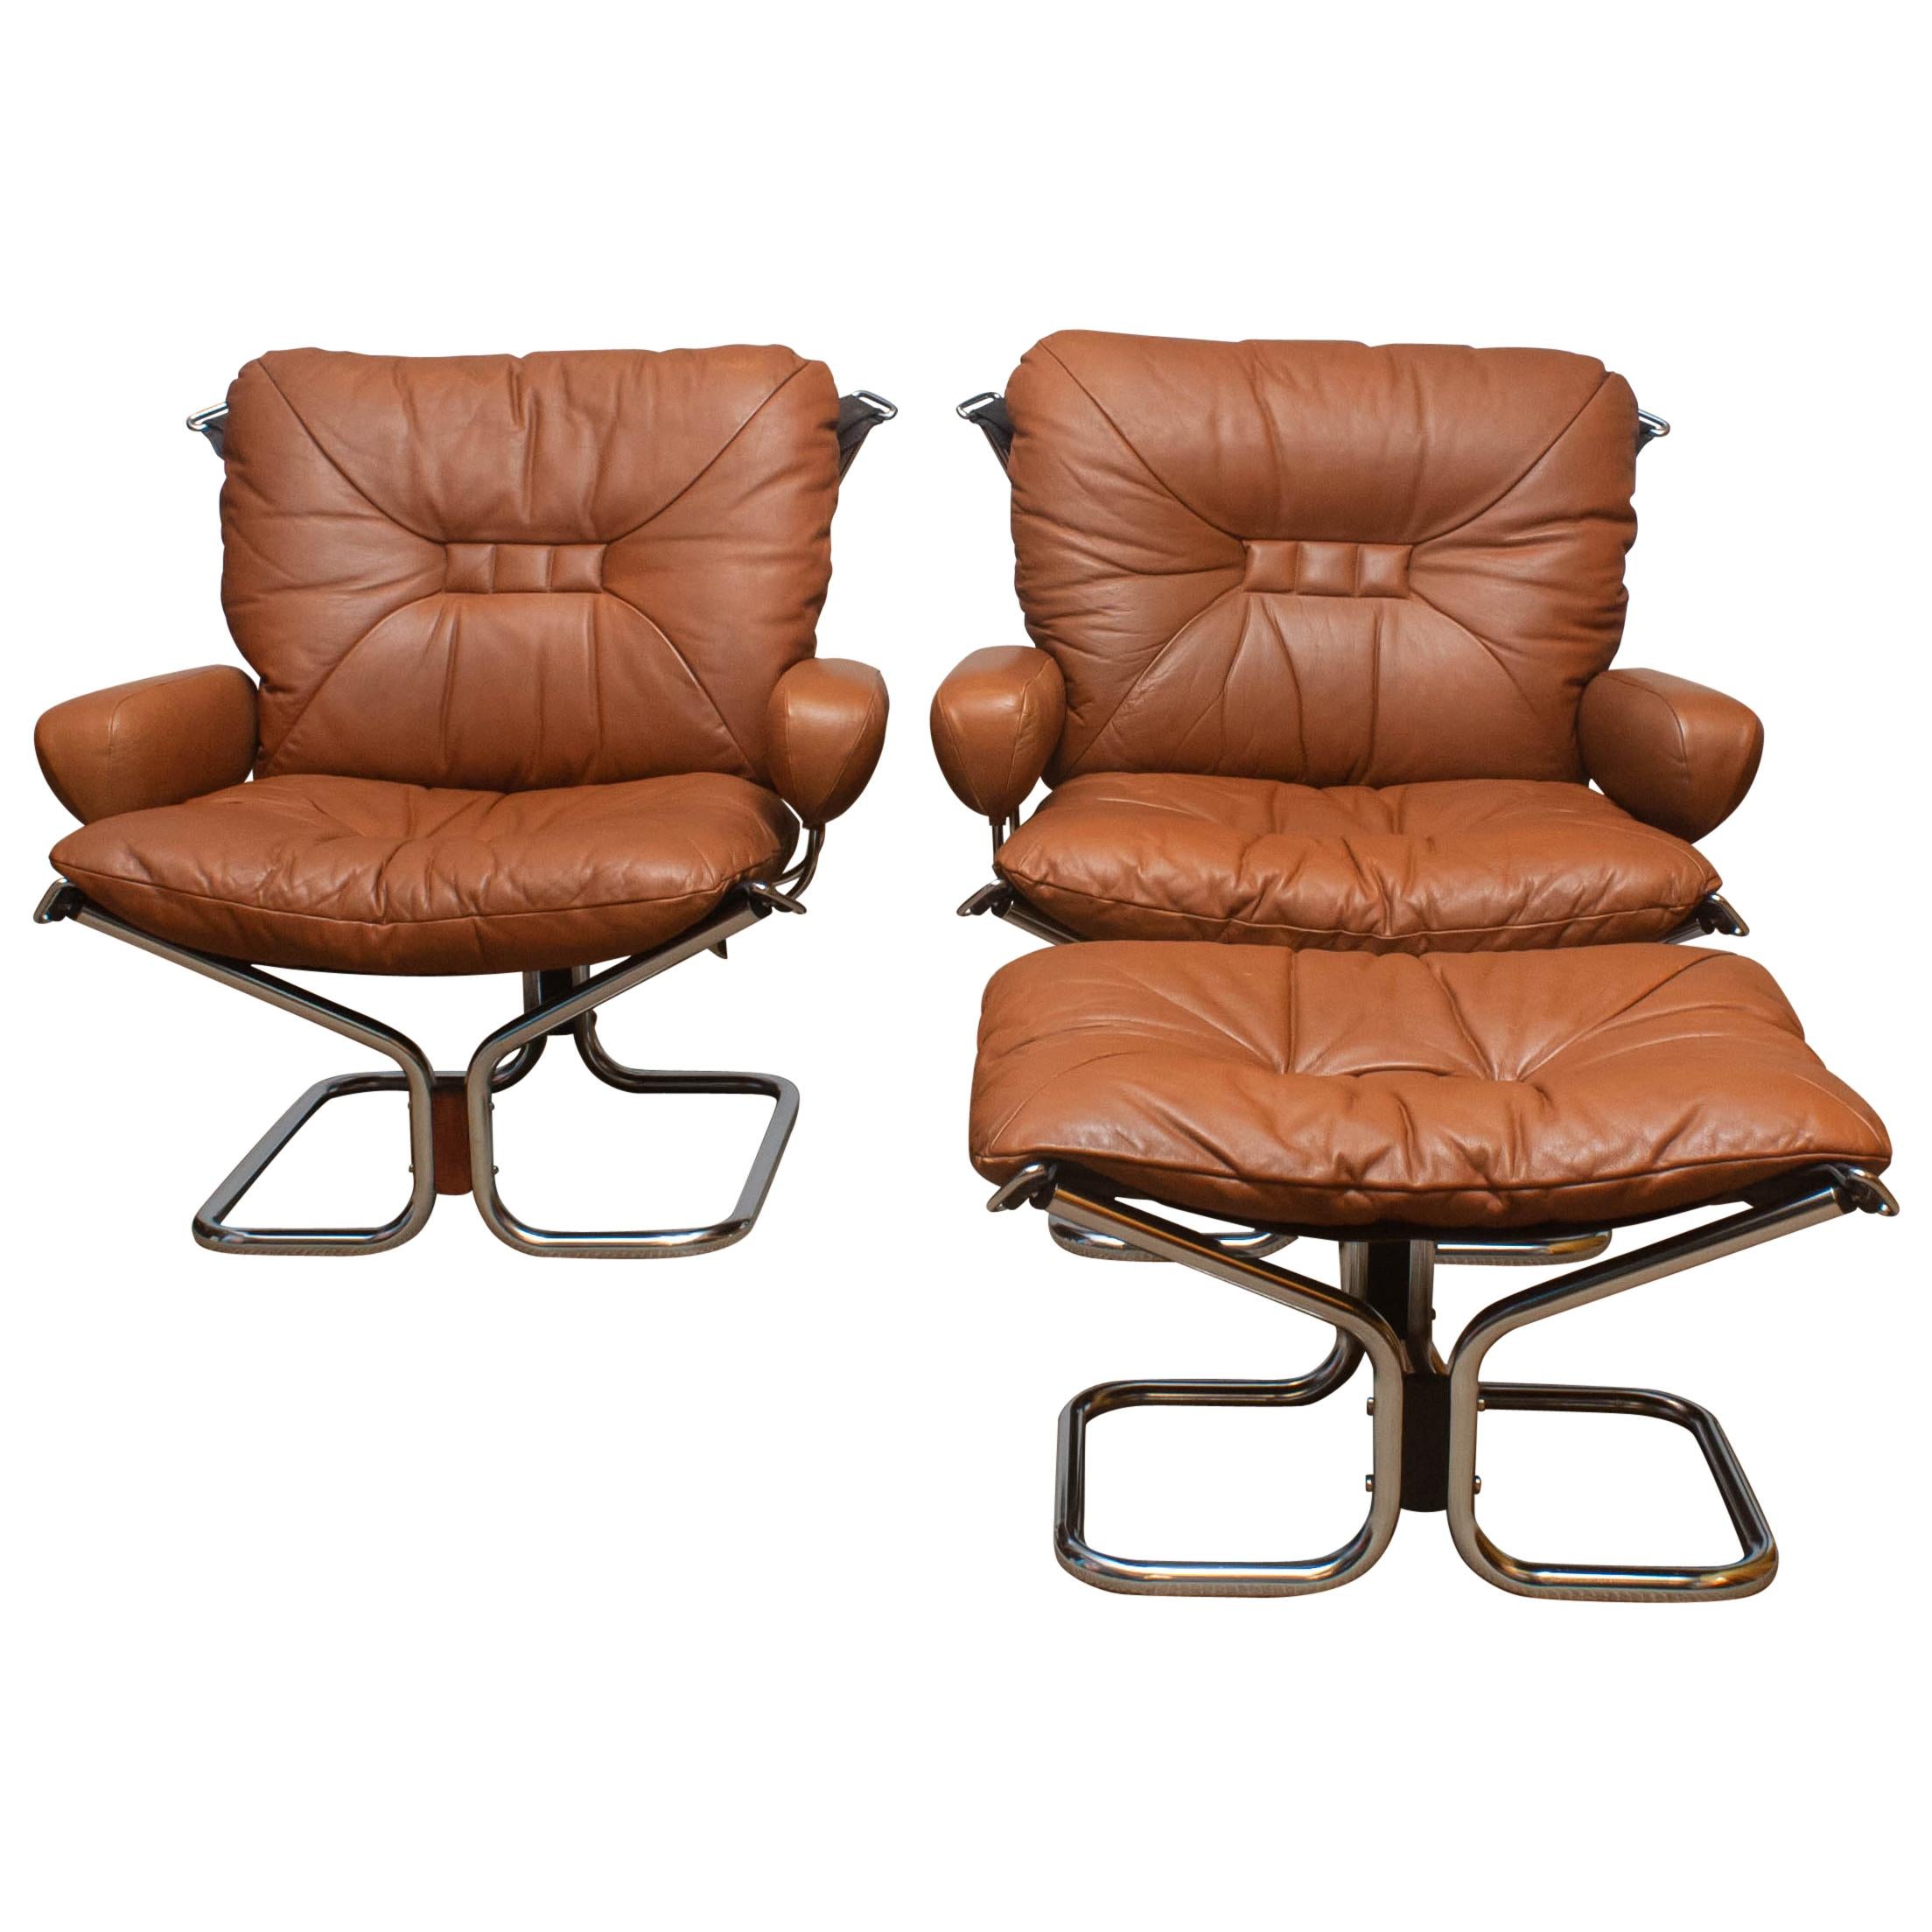 1970s Lounge Set Cognac Leather and Steel by Harald Relling for Westnofa, Norway In Good Condition In Silvolde, Gelderland